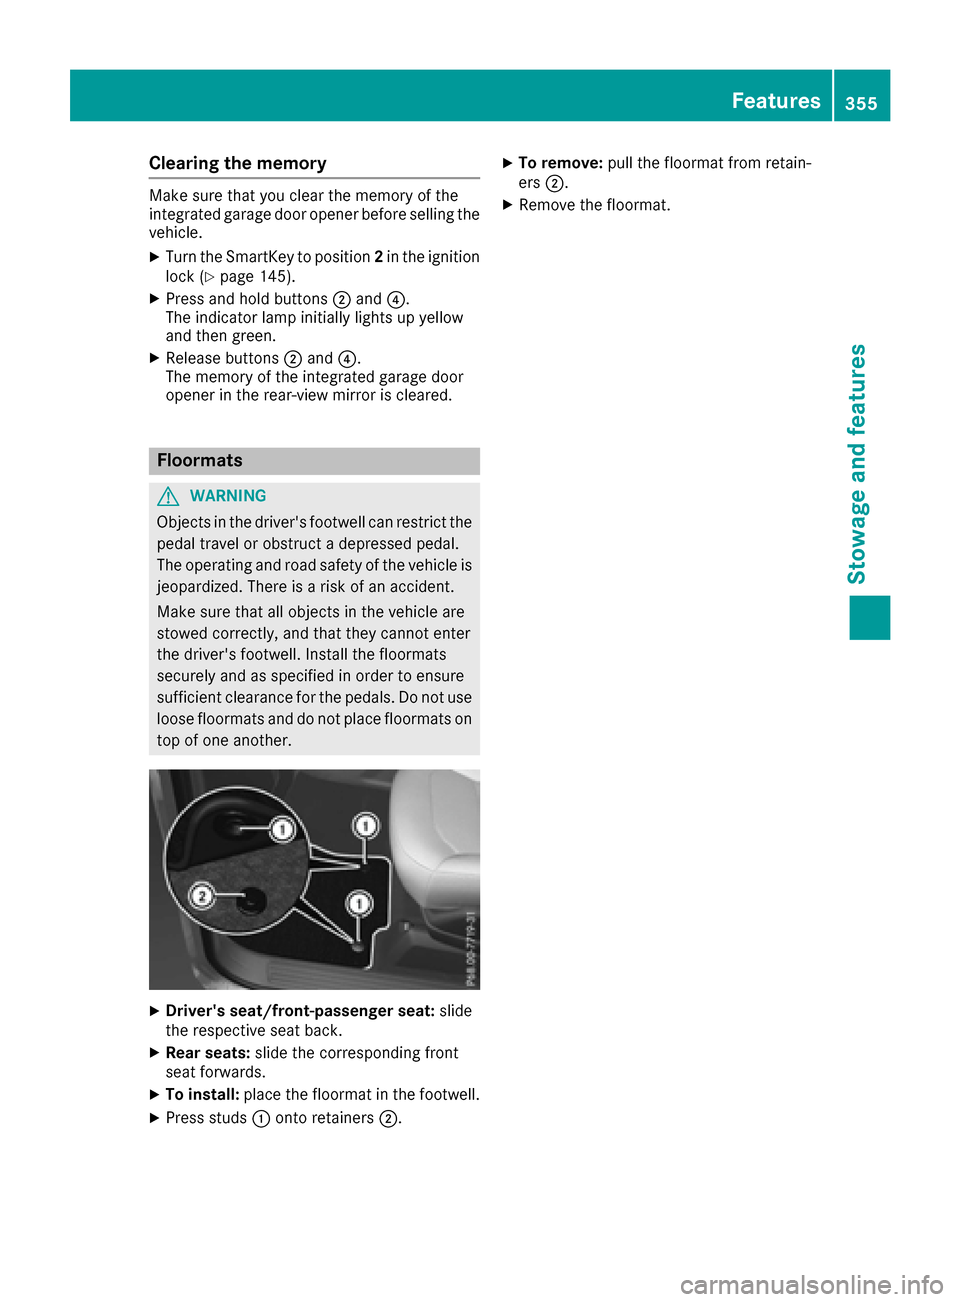 MERCEDES-BENZ GLE-Class 2016 W218 Owners Guide Clearing the memory
Make sure that you clear the memory of the
integrated garage door opener before selling the
vehicle.
XTurn the SmartKey to position2in the ignition
lock (Ypage 145).
XPress and hol